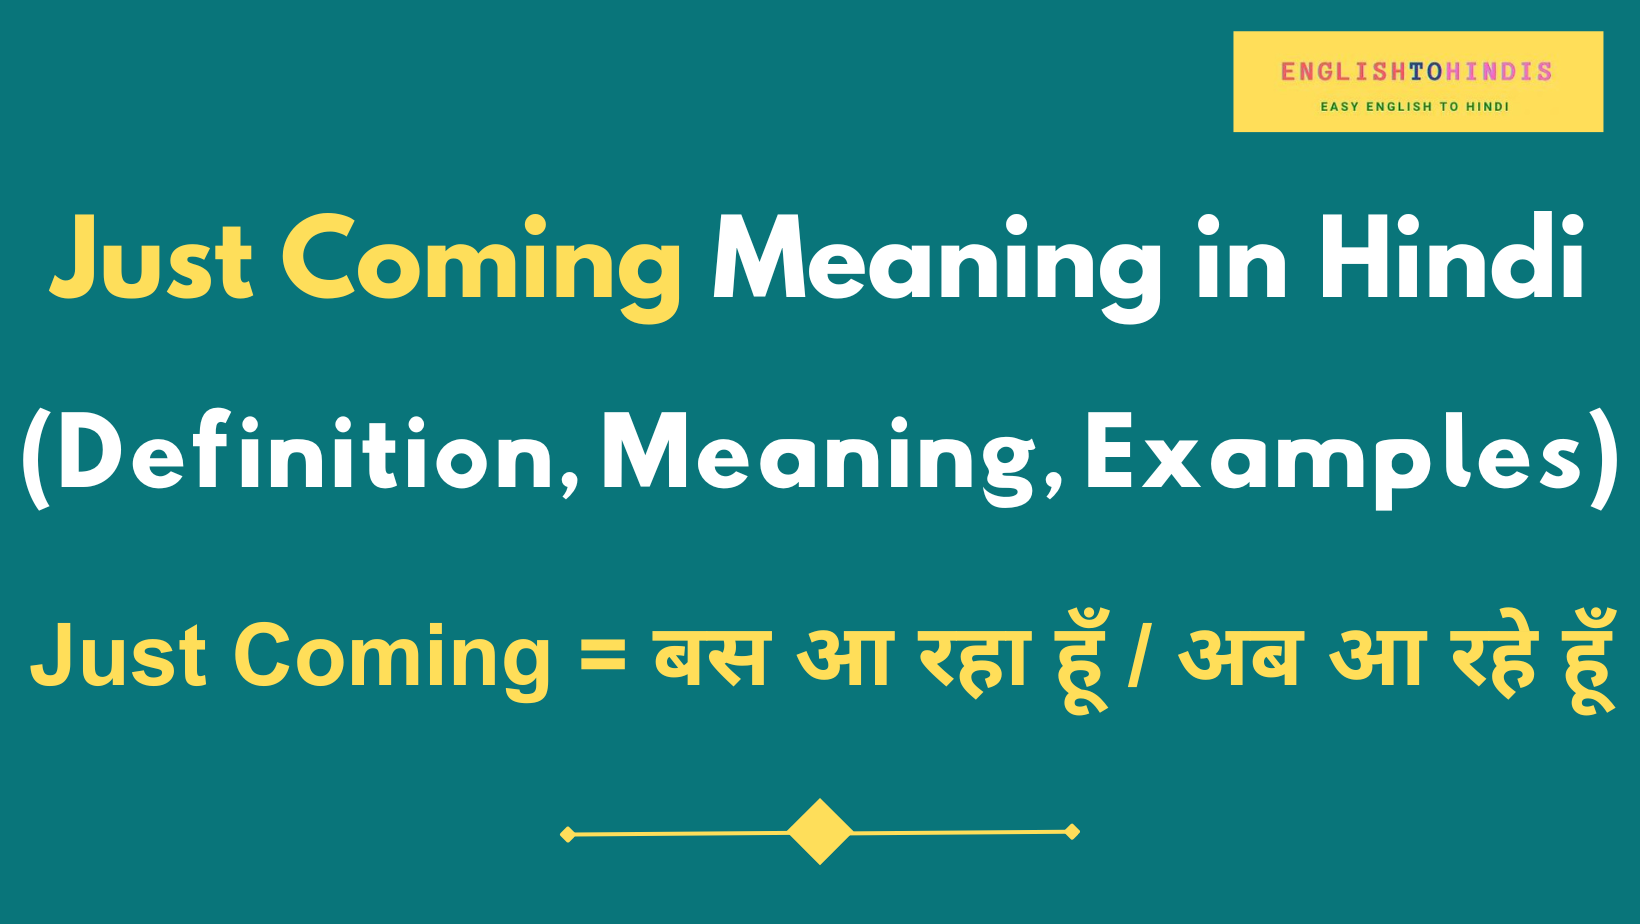 Just Coming Meaning in Hindi